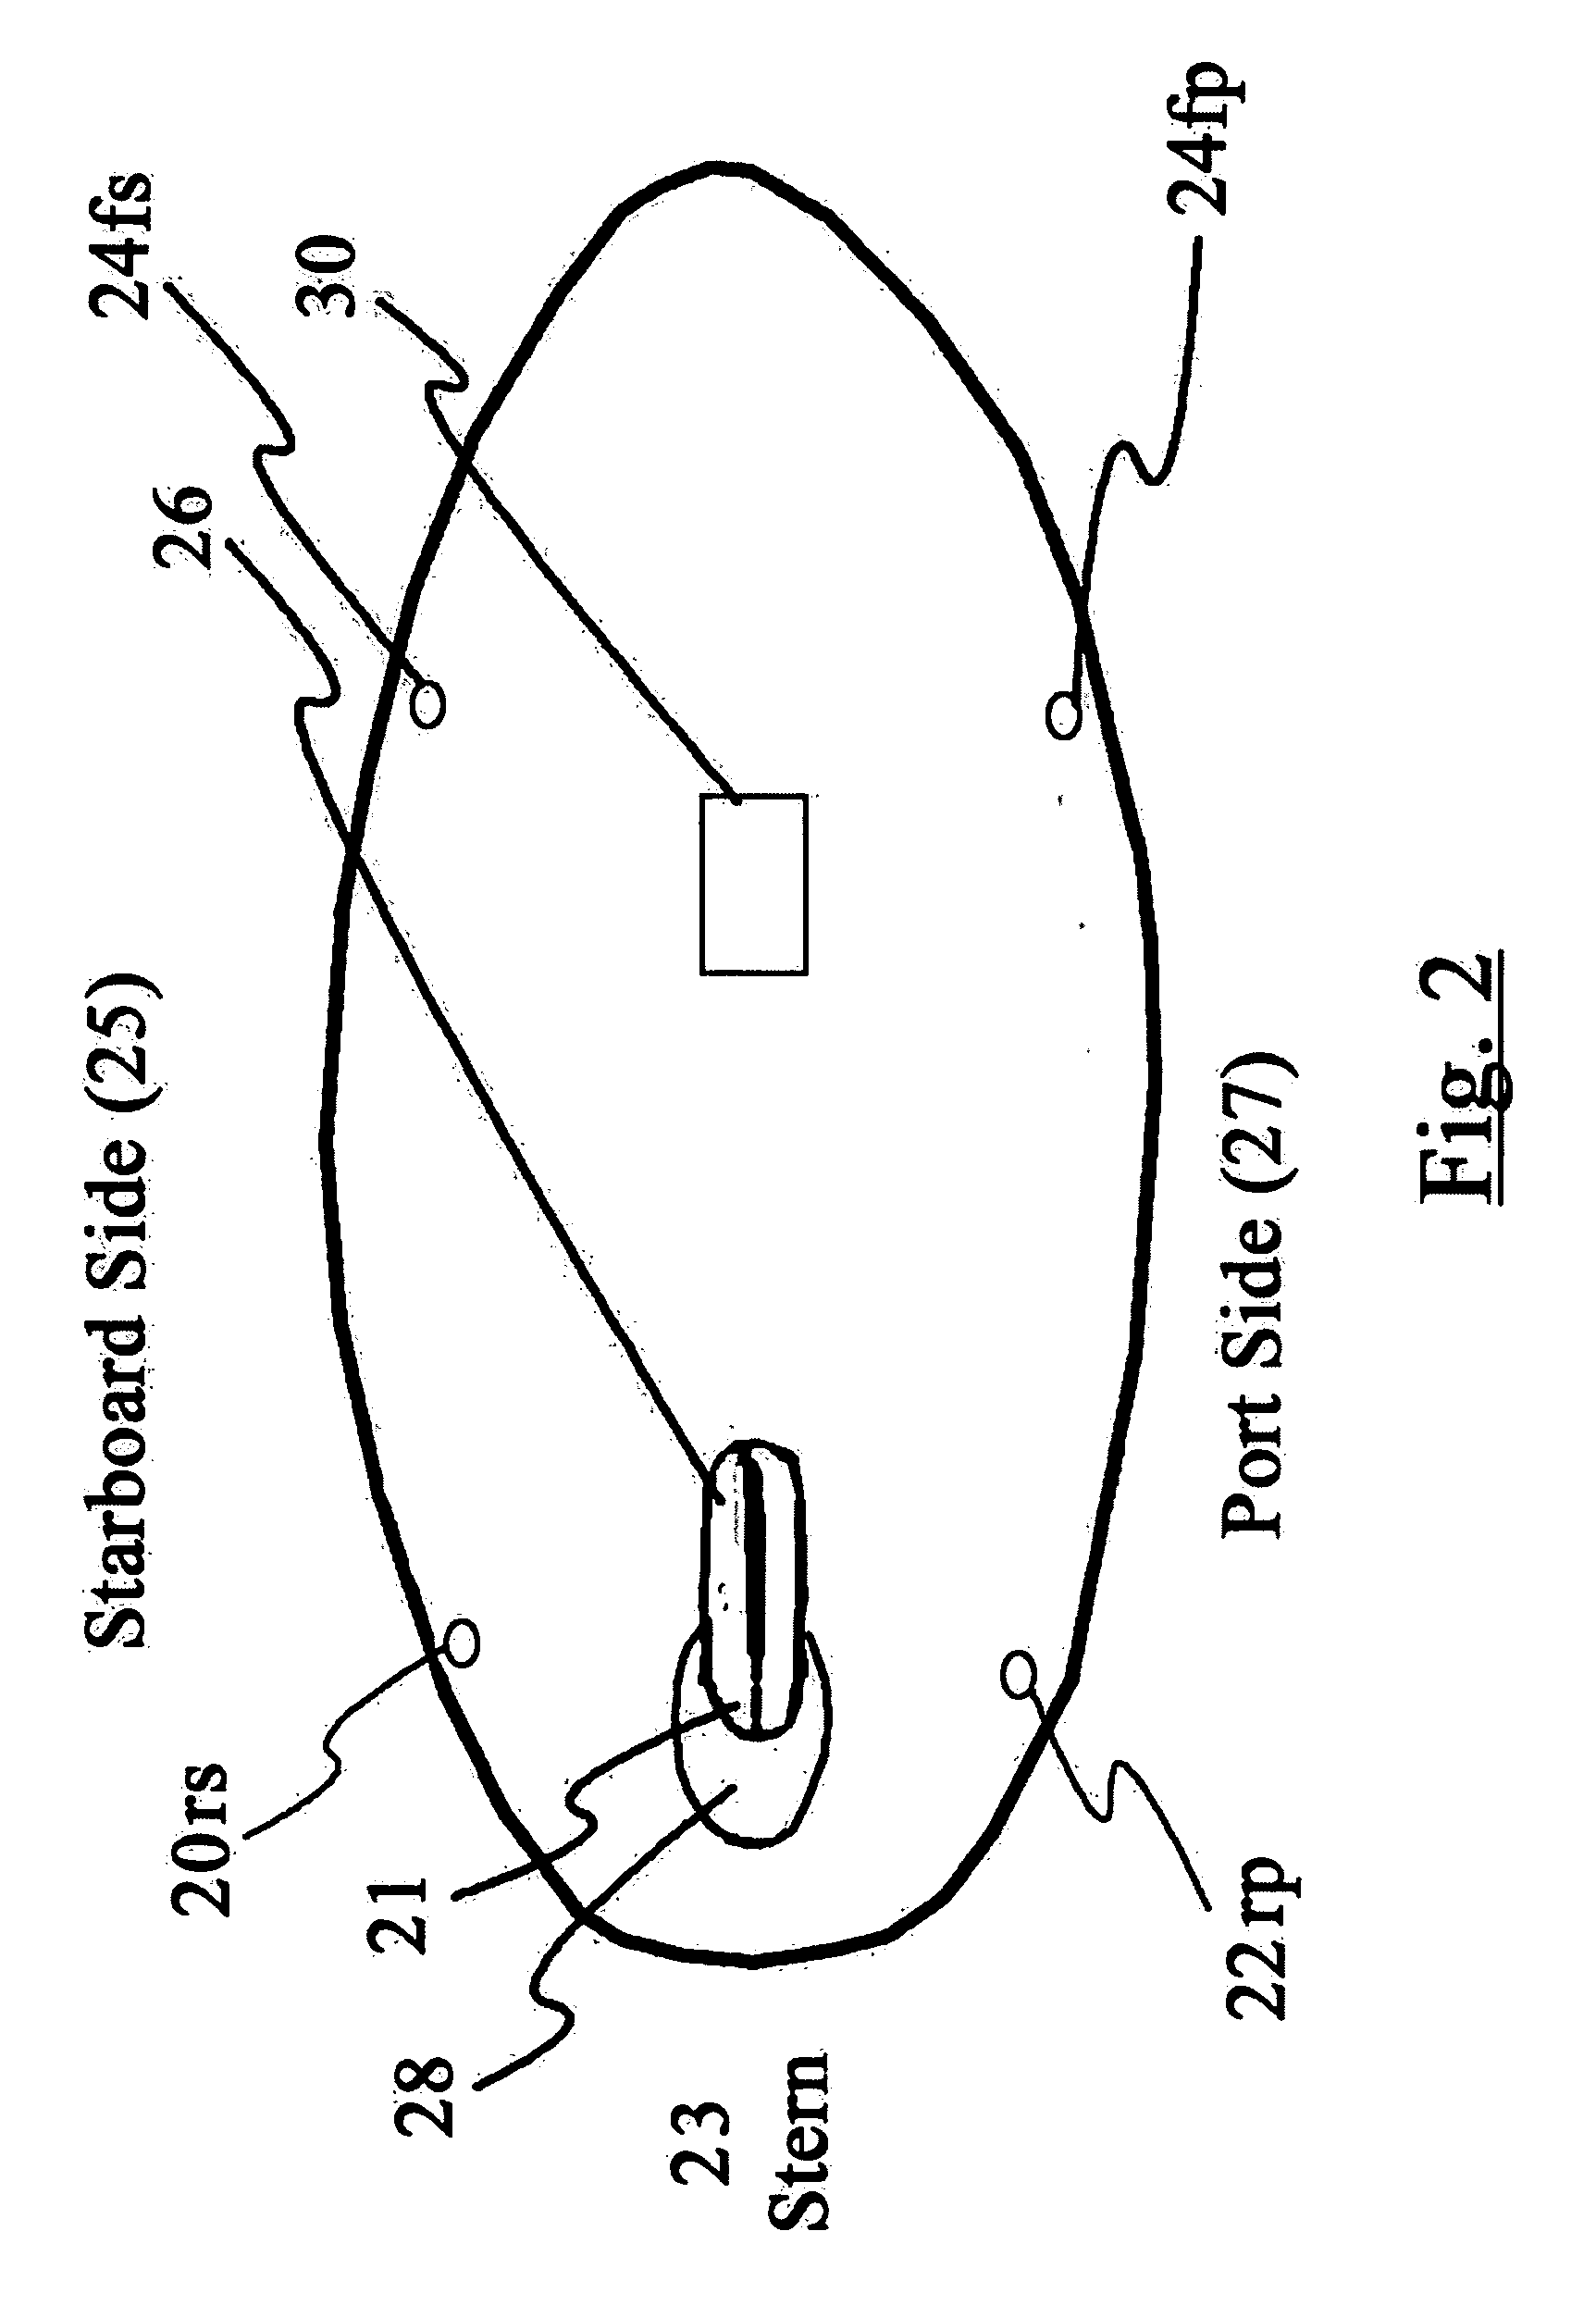 Powered riding apparatus with electronic controls and options